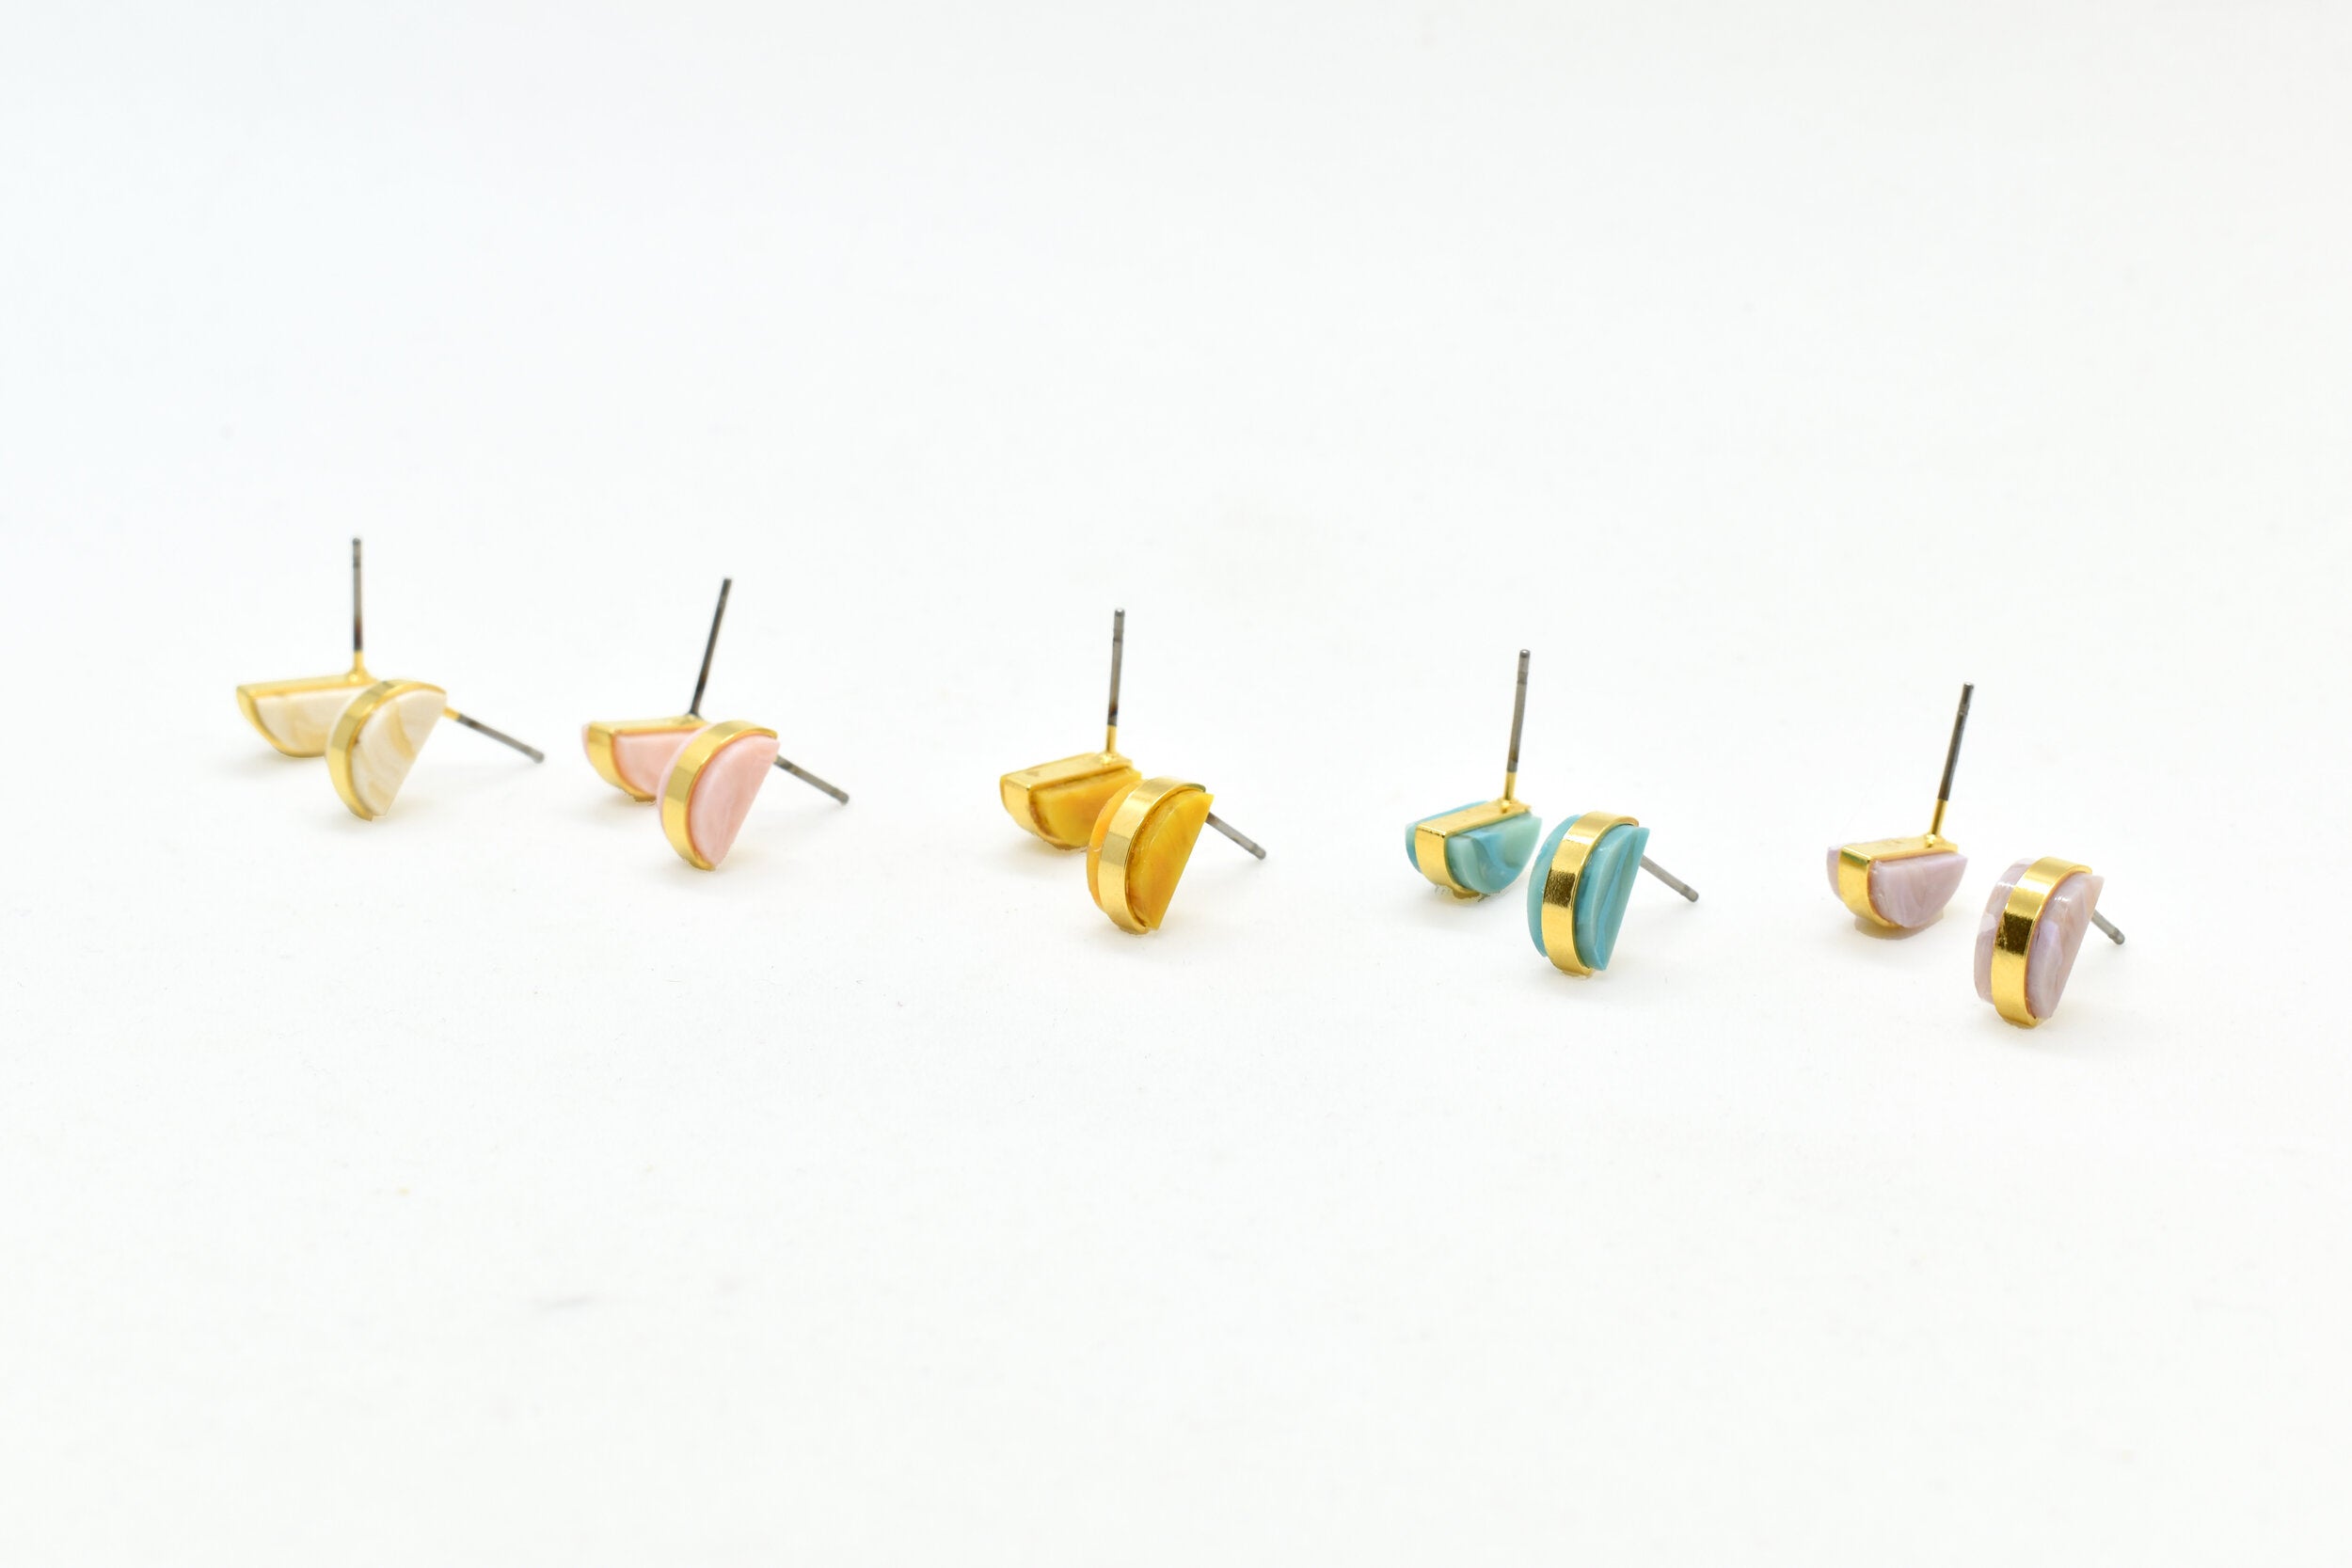 architectural small statement earrings in crystal quartz, rosy pink, golden yellow, aqua blue, and lavender.